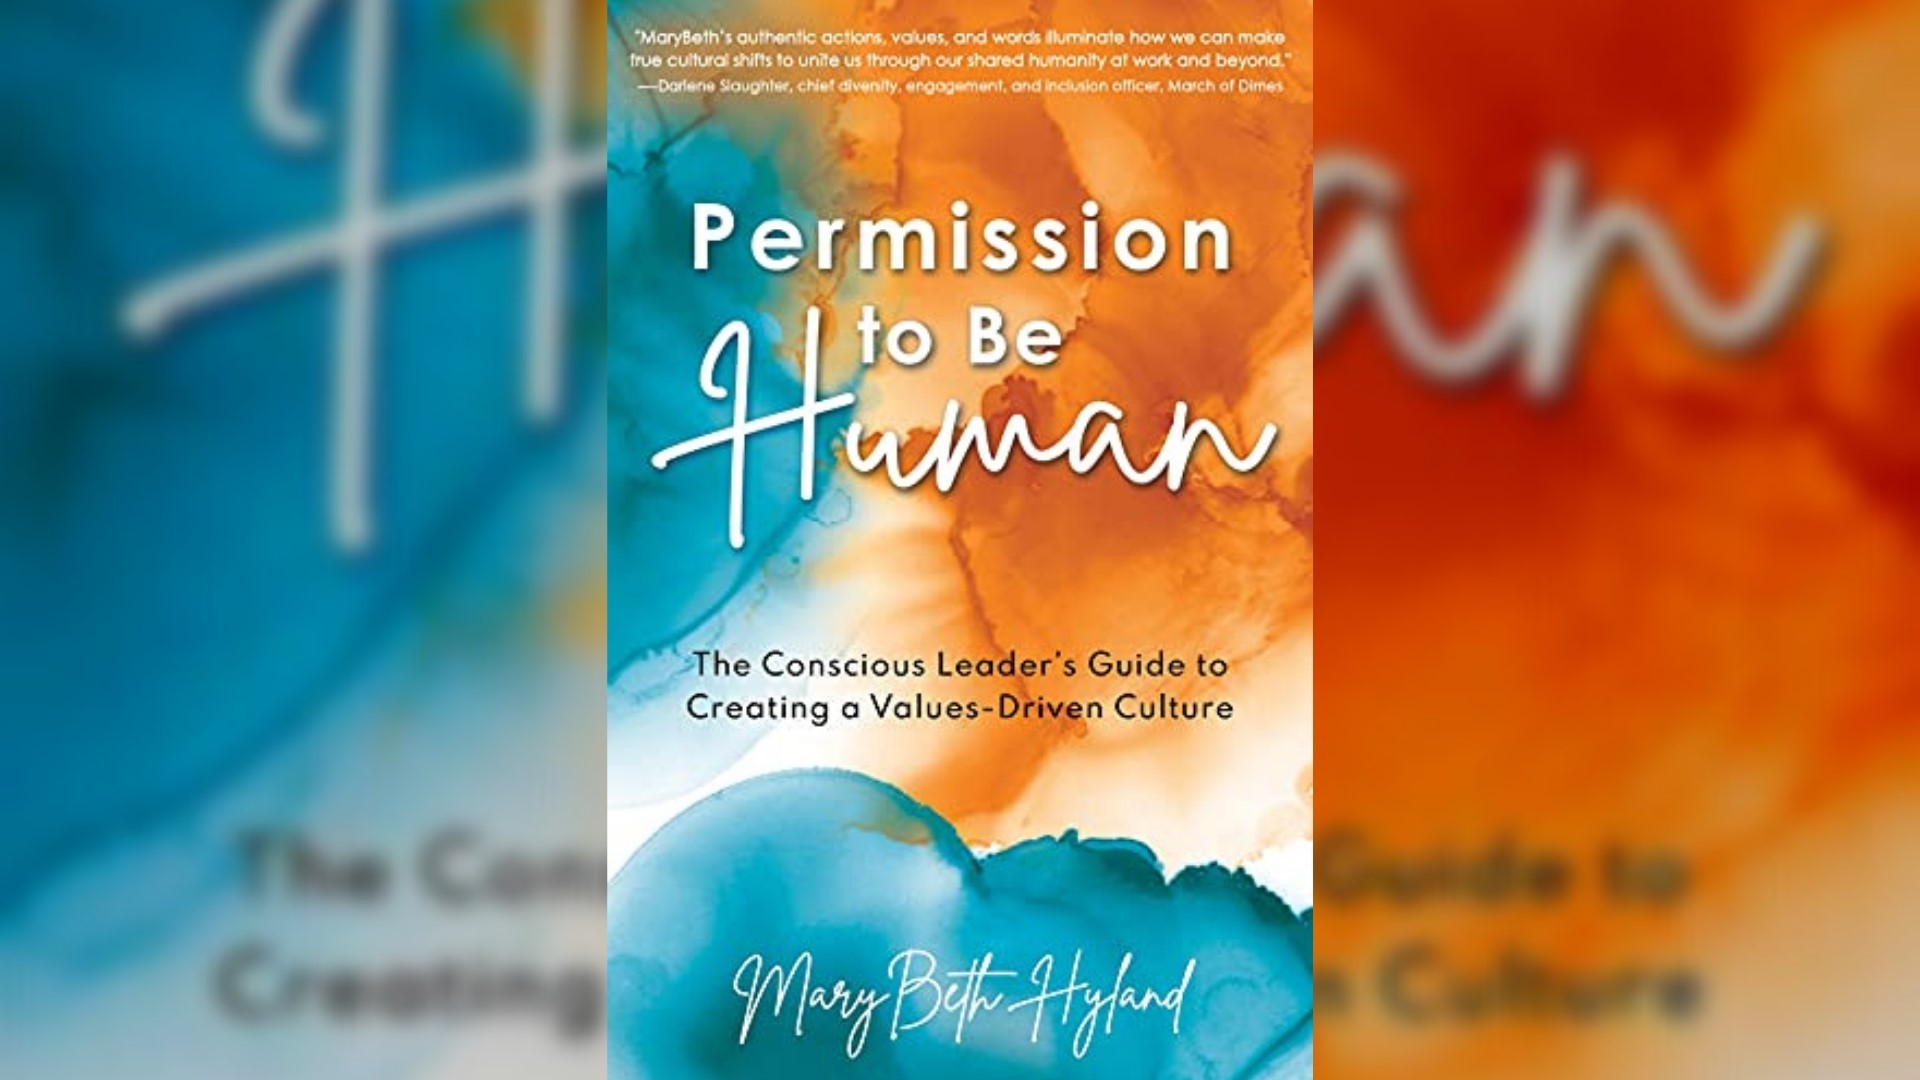 MaryBeth Hyland's new book, "Permission to be Human," is about being centered and trying not to be perfect. #newdaynw